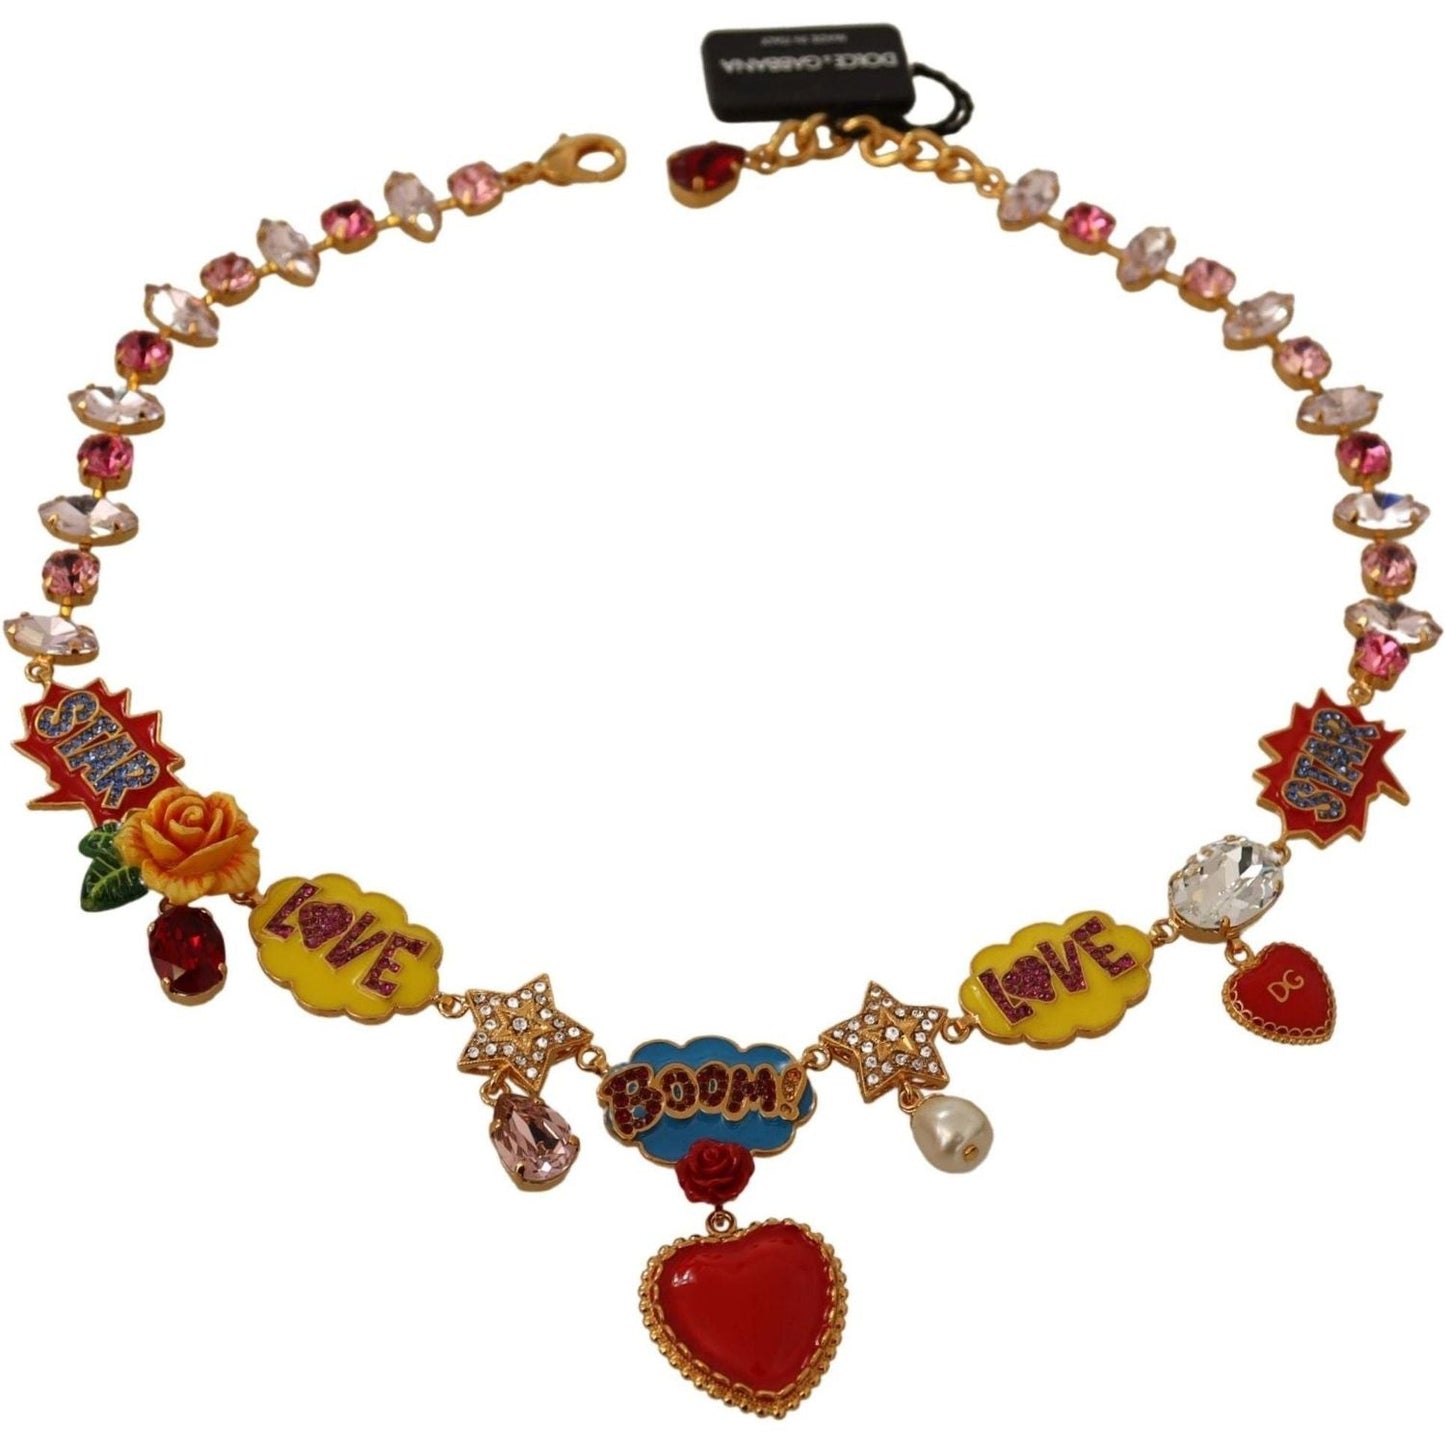 Dolce & Gabbana Charm Necklace with Hand-Painted Elements rose-heart-star-chain-pink-red-gold-crystal-necklace IMG_7414-e7b4af8a-cc5.jpg